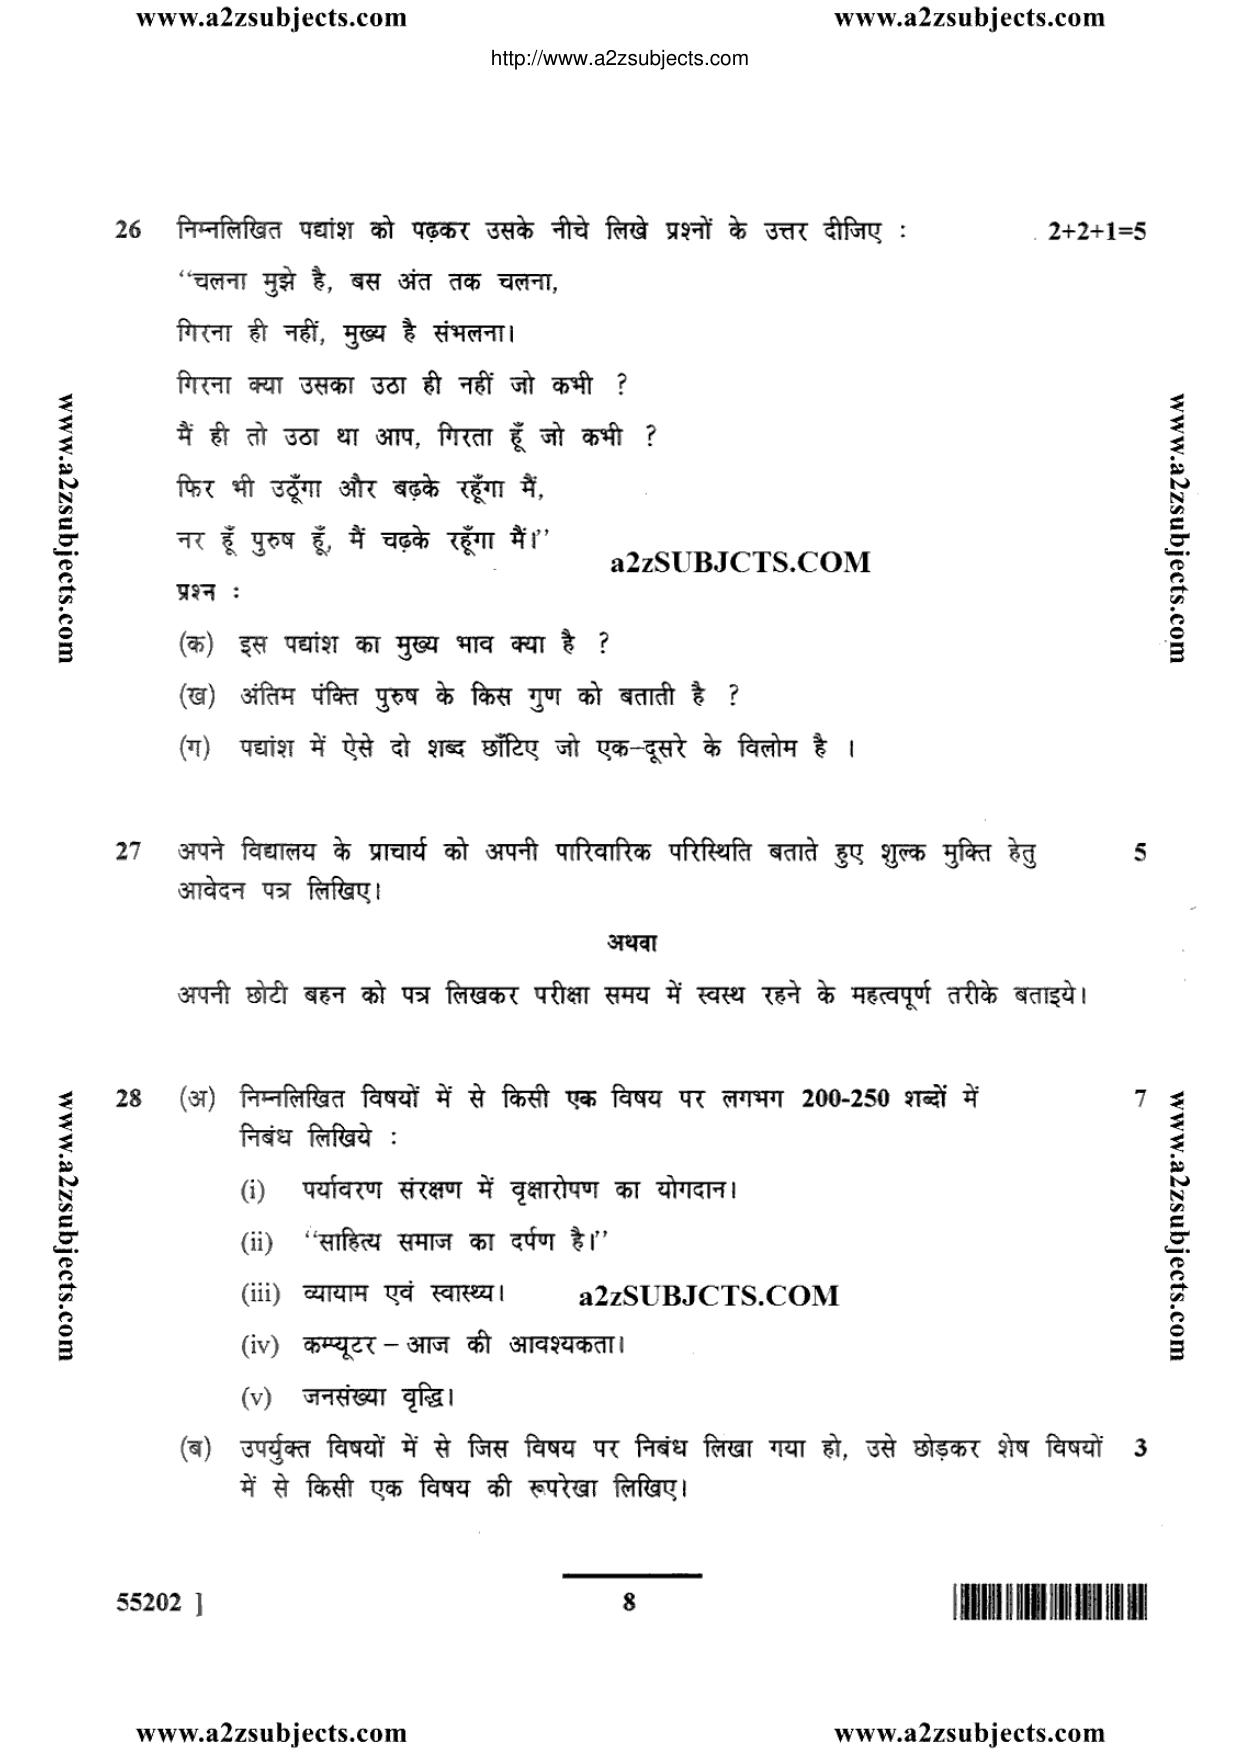 MP Board Class 10 Marathi 2017 Question Paper - Page 8